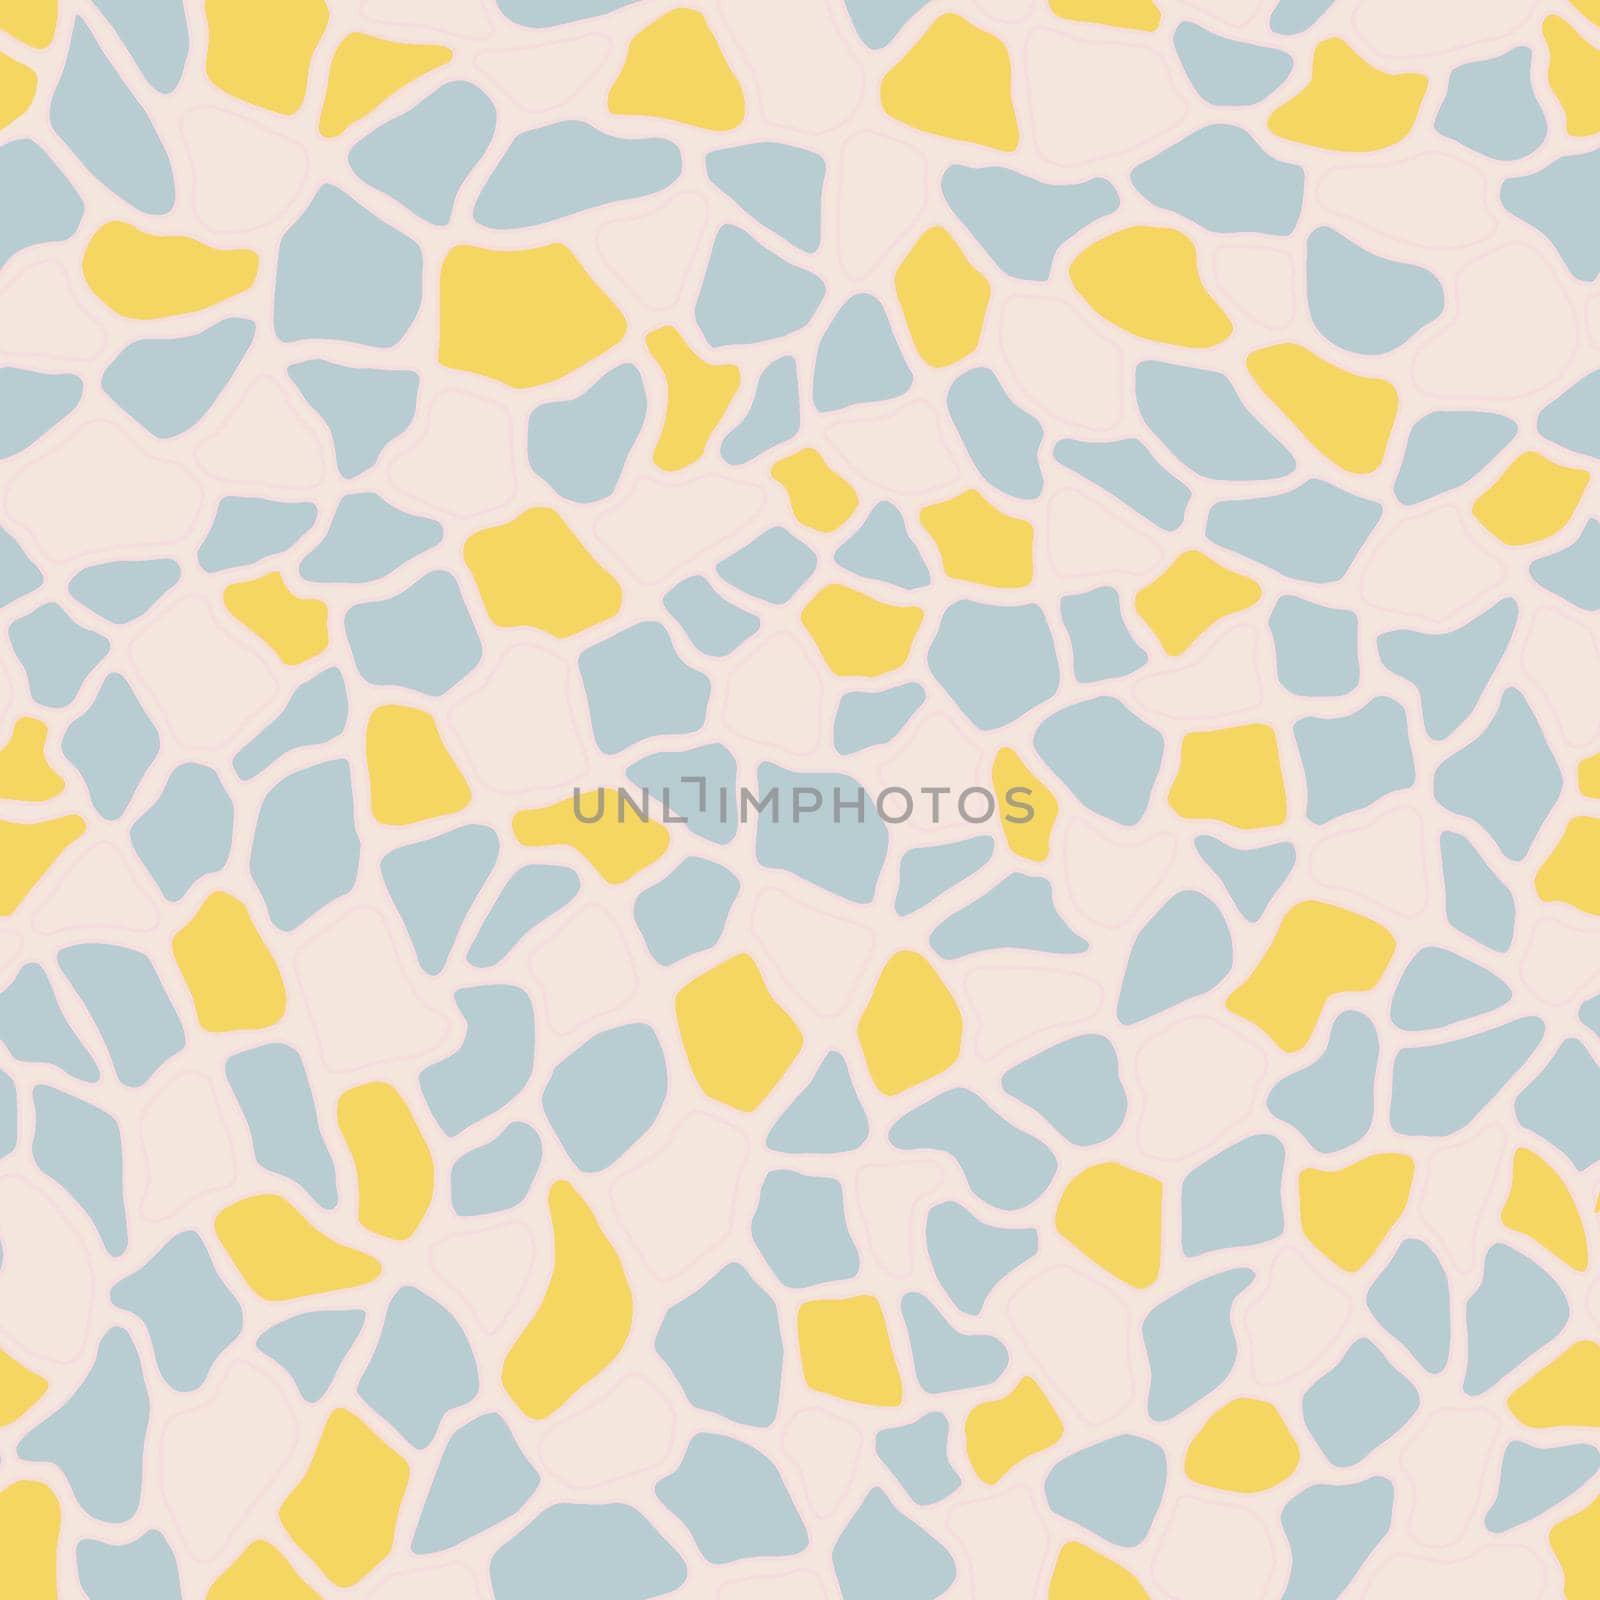 Terrazzo modern trendy colorful seamless pattern.Abstract creative backdrop with chaotic small pieces irregular shapes.Ideal for wrapping paper,textile,print,wallpaper,terrazzo flooring.Pastel colors.